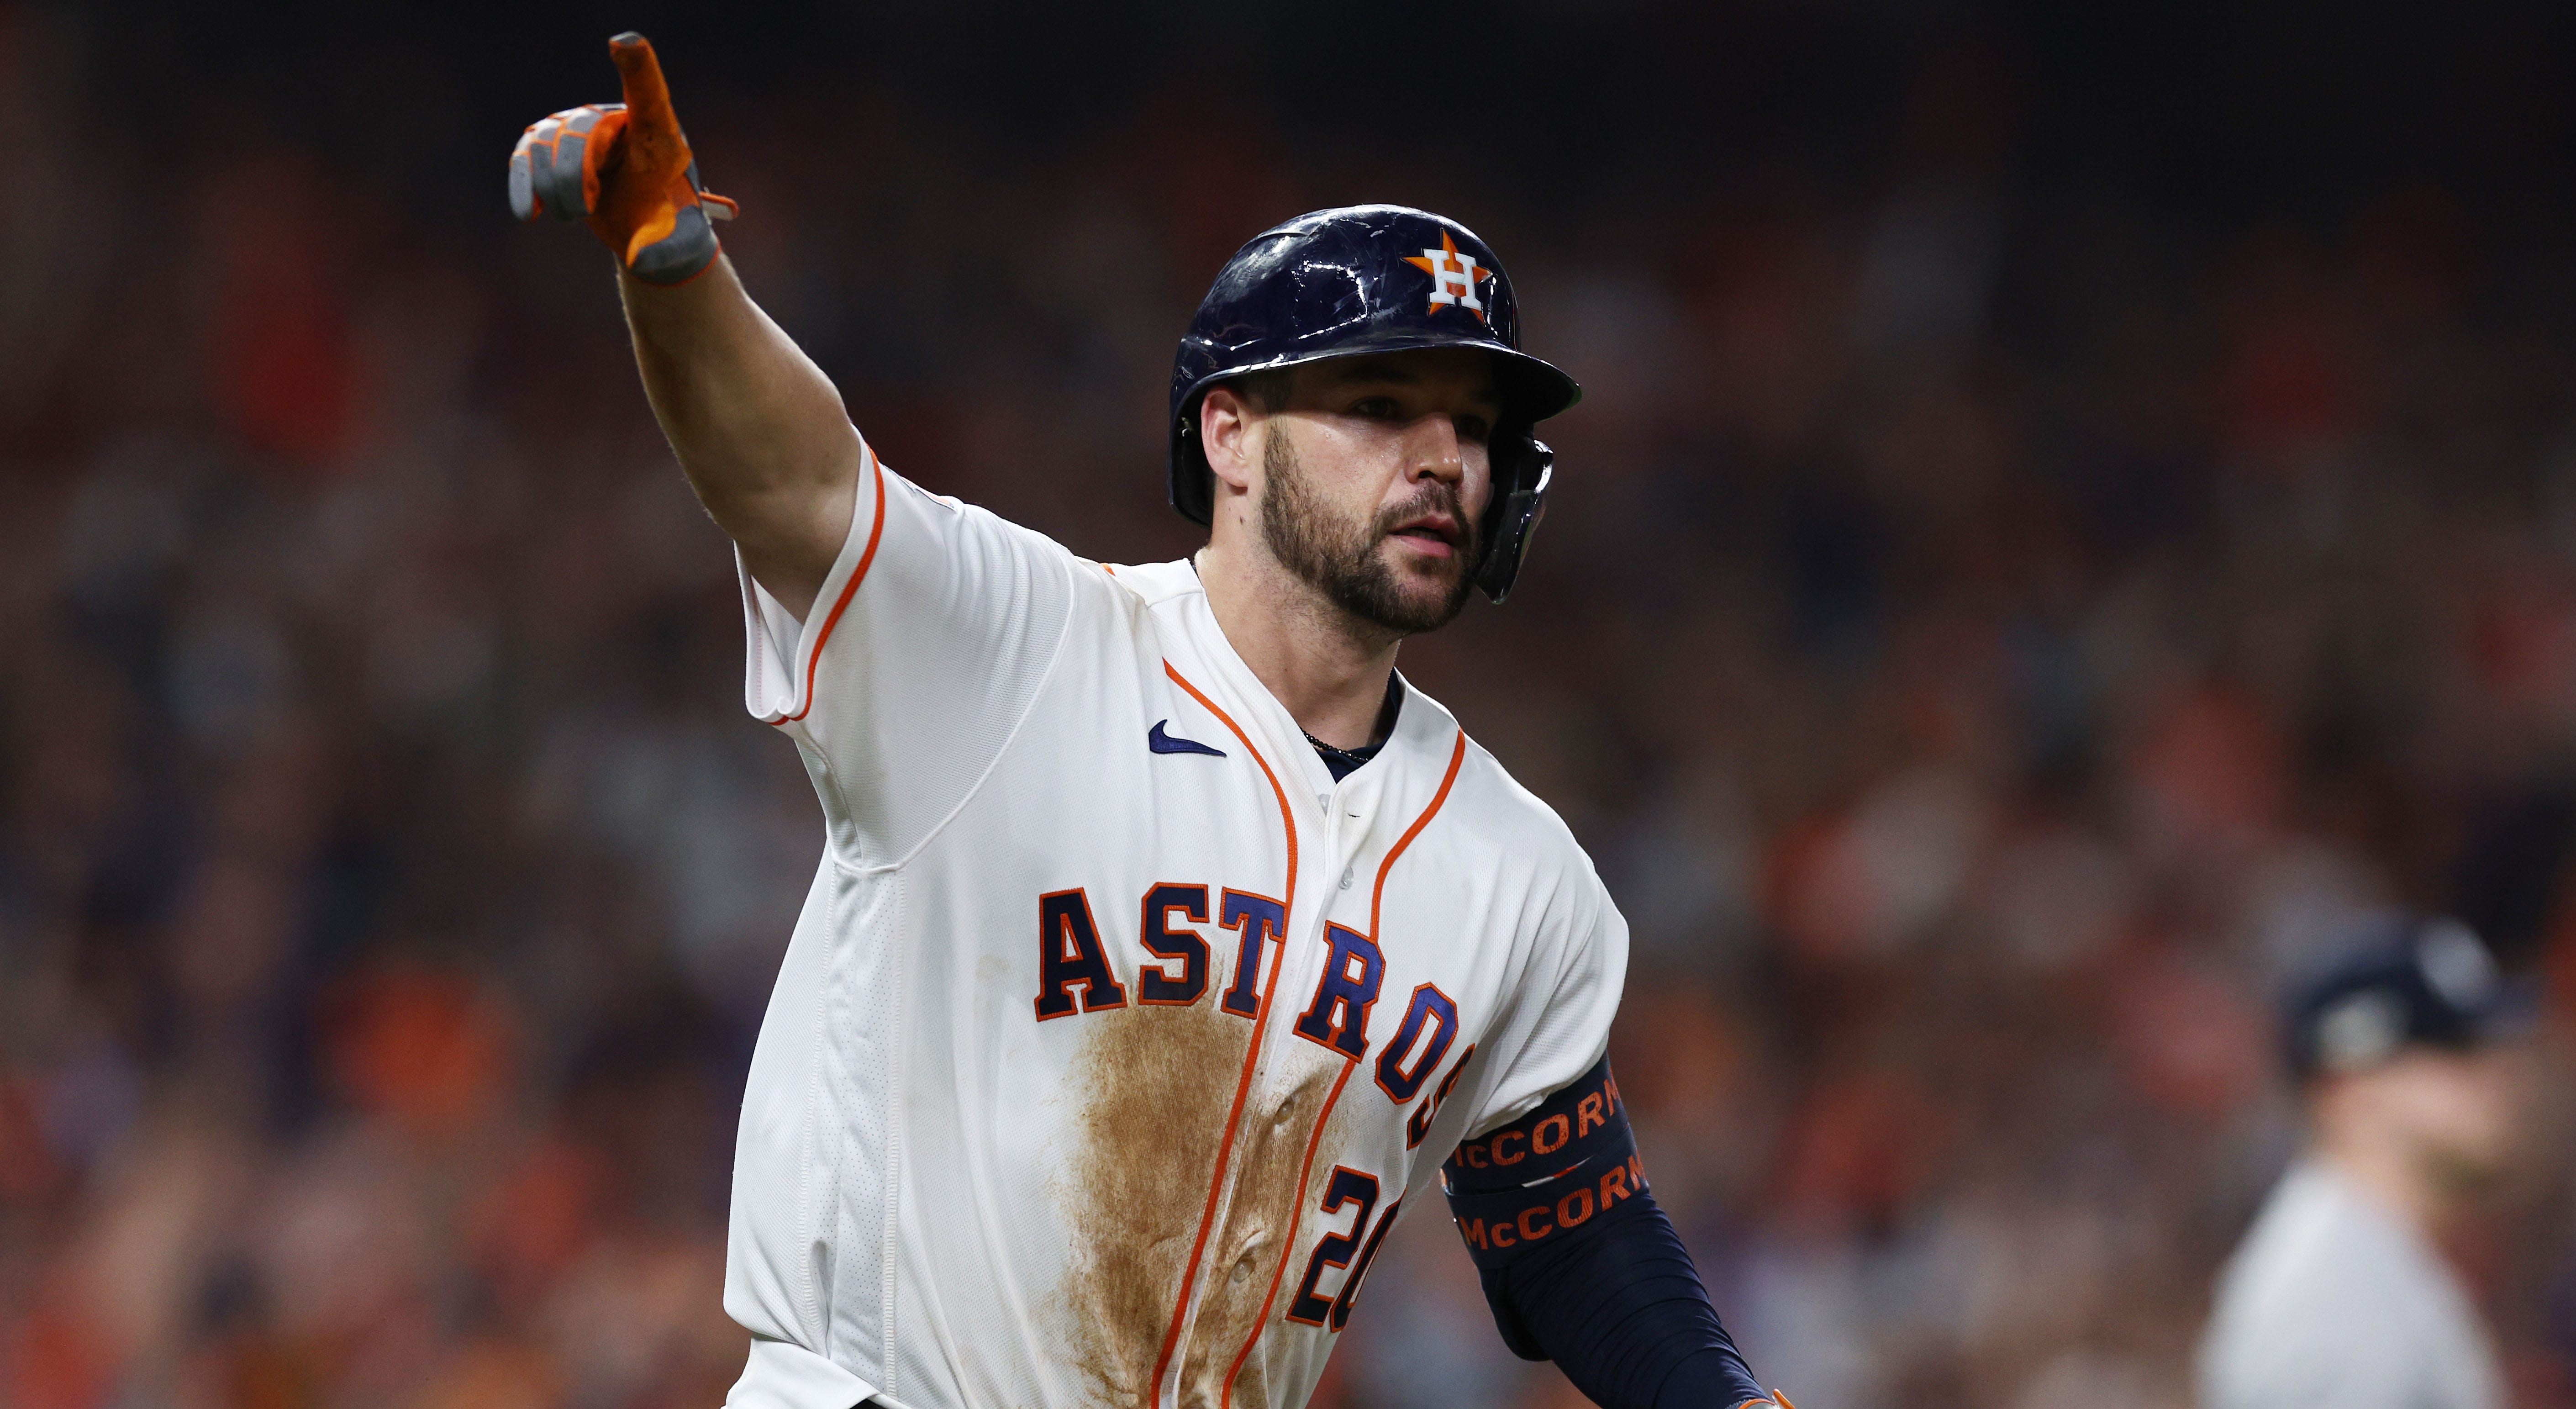 Astros Chas McCormick is the American League's hottest hitter